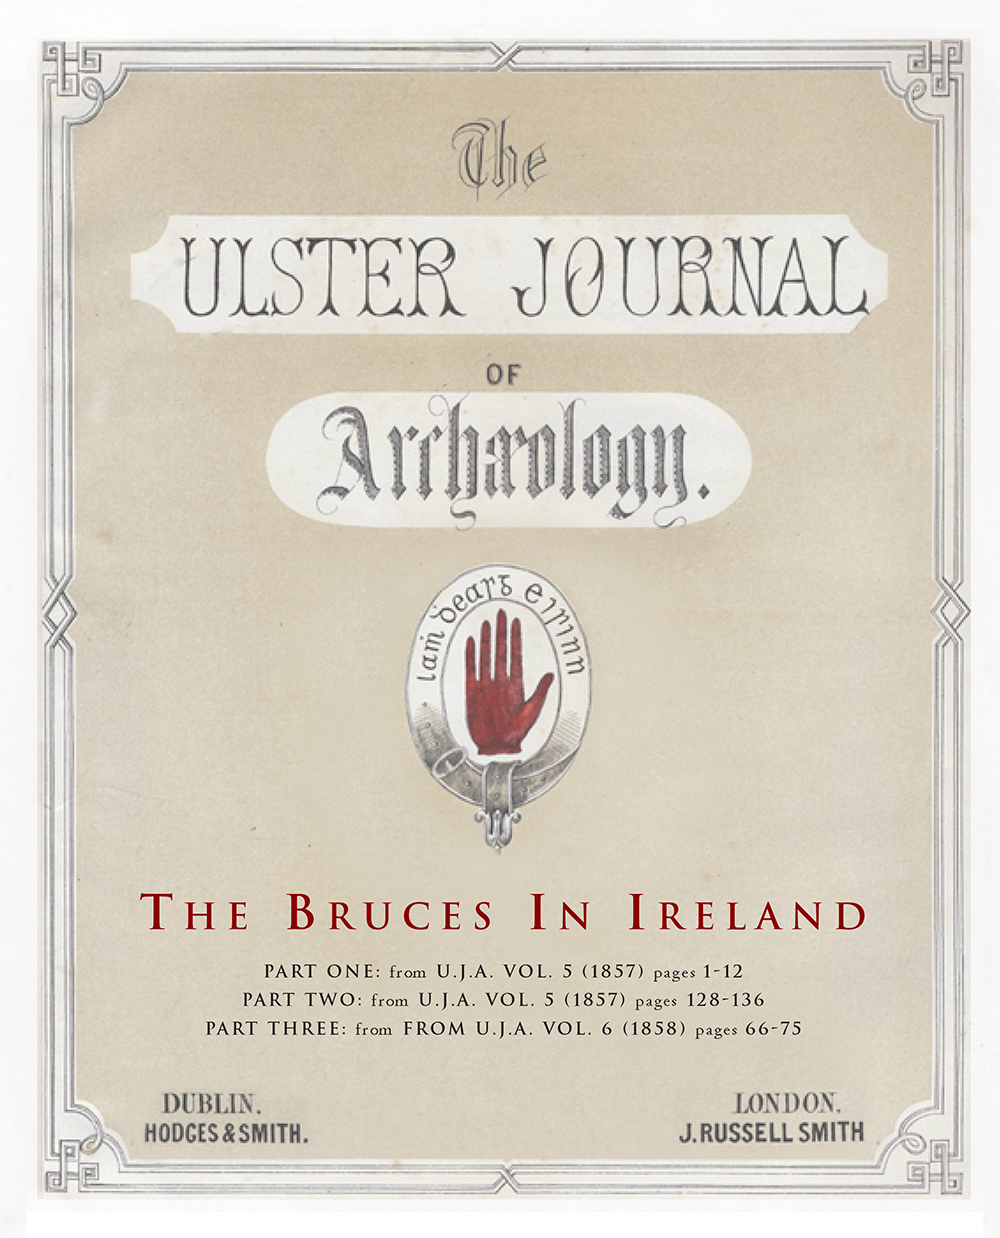 The Bruces in Ireland